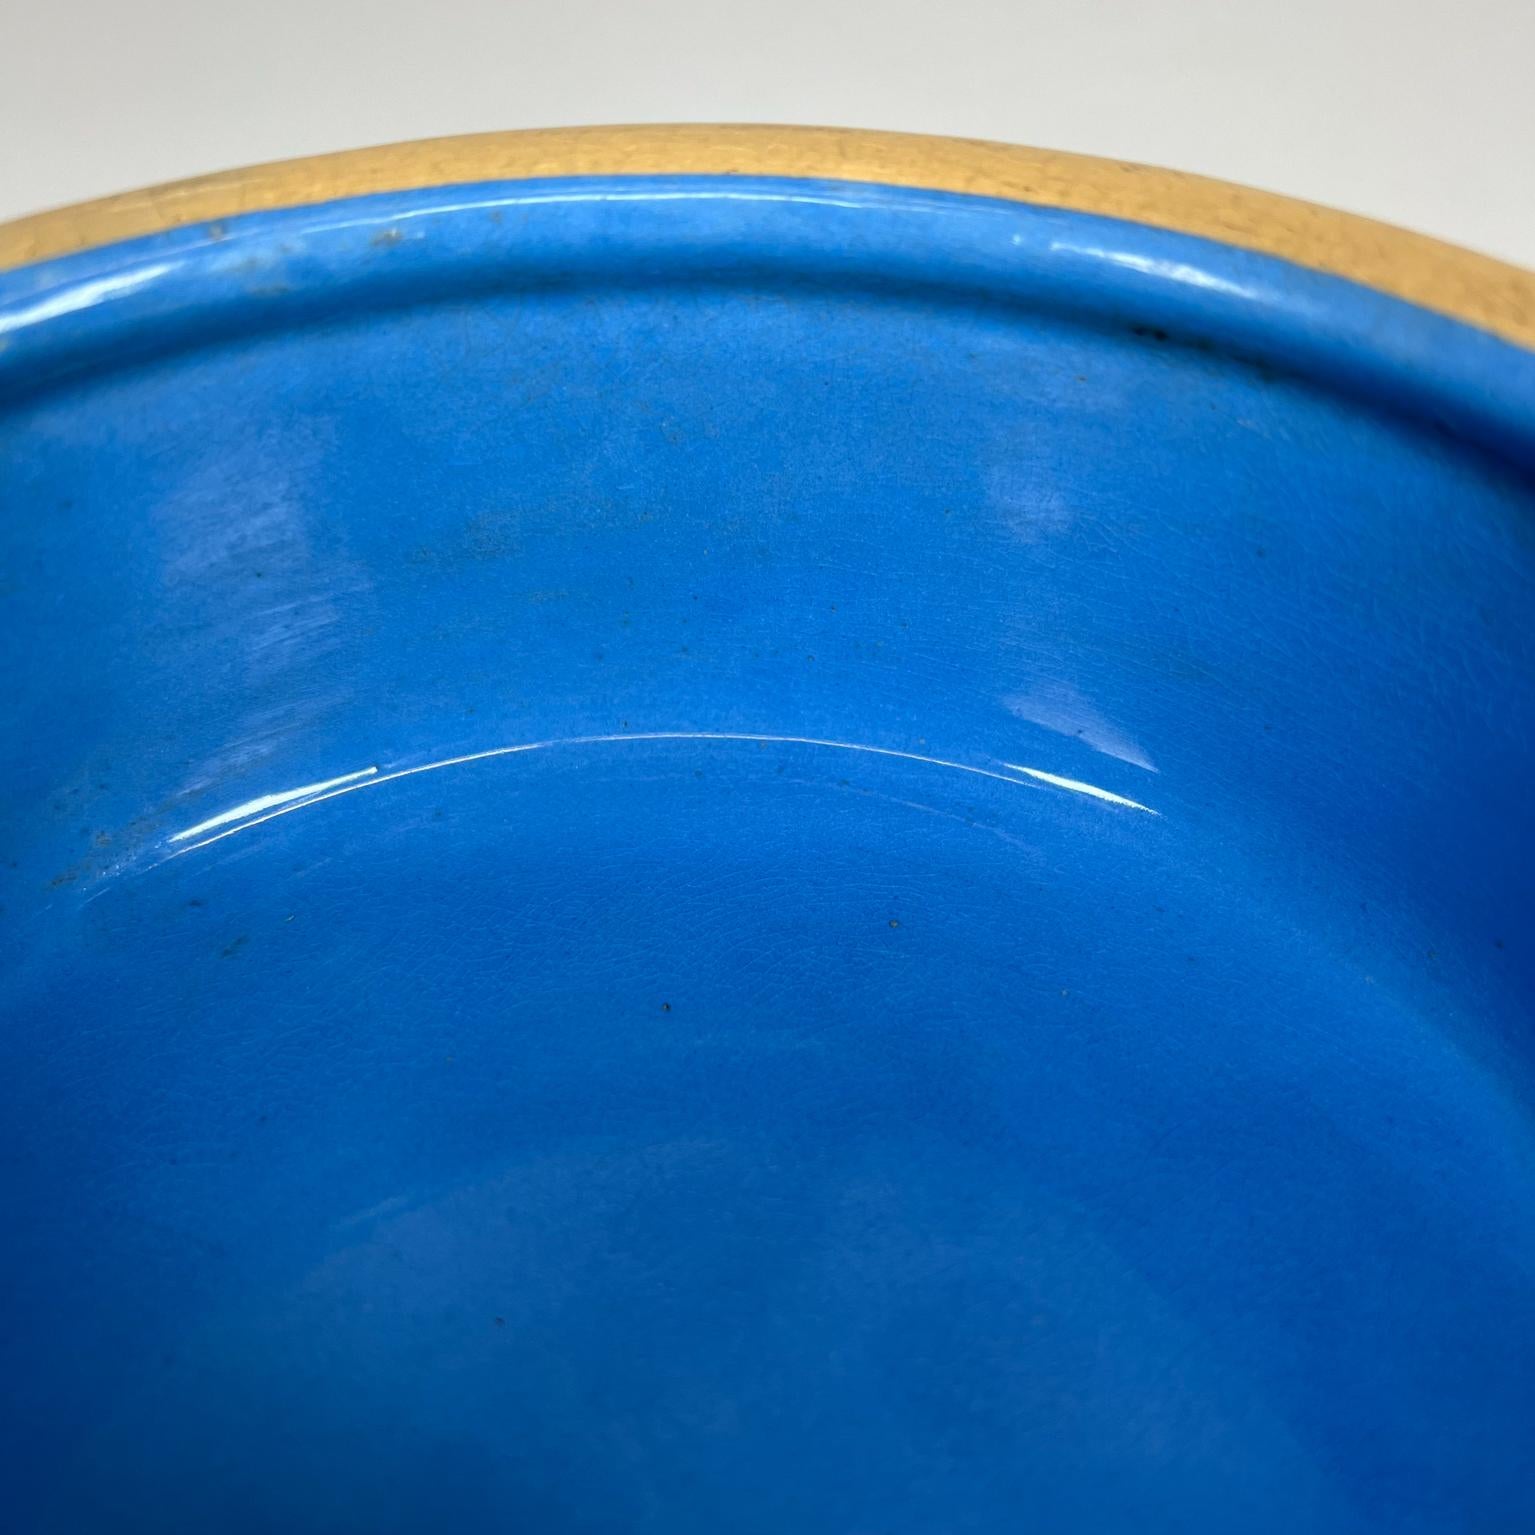 1960s Vintage Dreamy Blue Tan Ceramic Bowl made in England For Sale 1